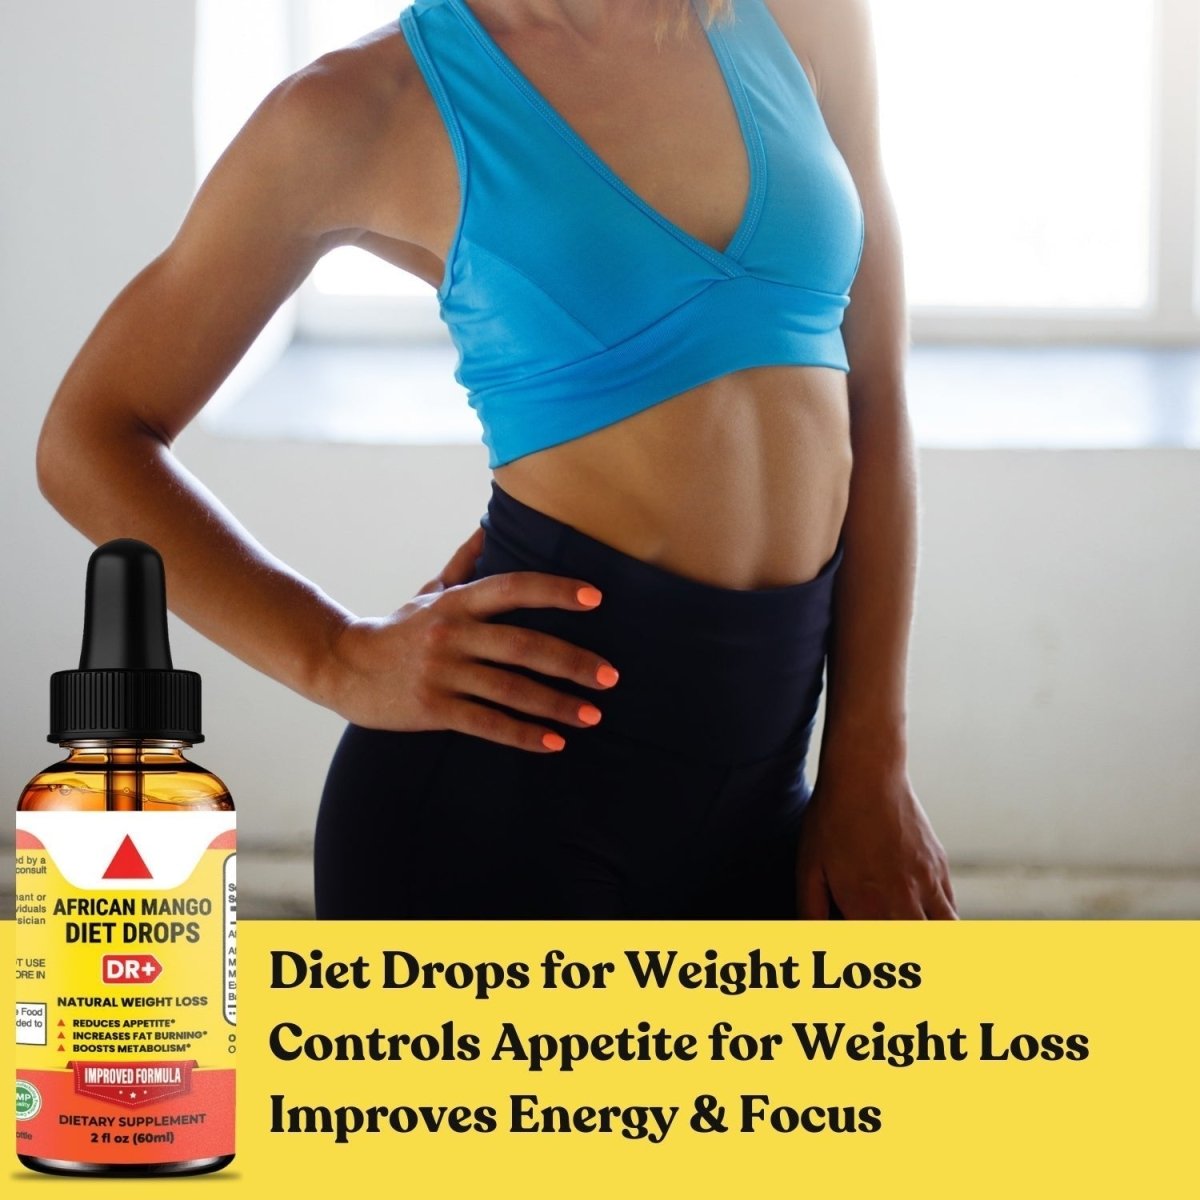 African Mango Wellness Drops - Diet Drops Suppress Appetite Burn Fat Boost Energy Fast Results 2oz | 4-Pack